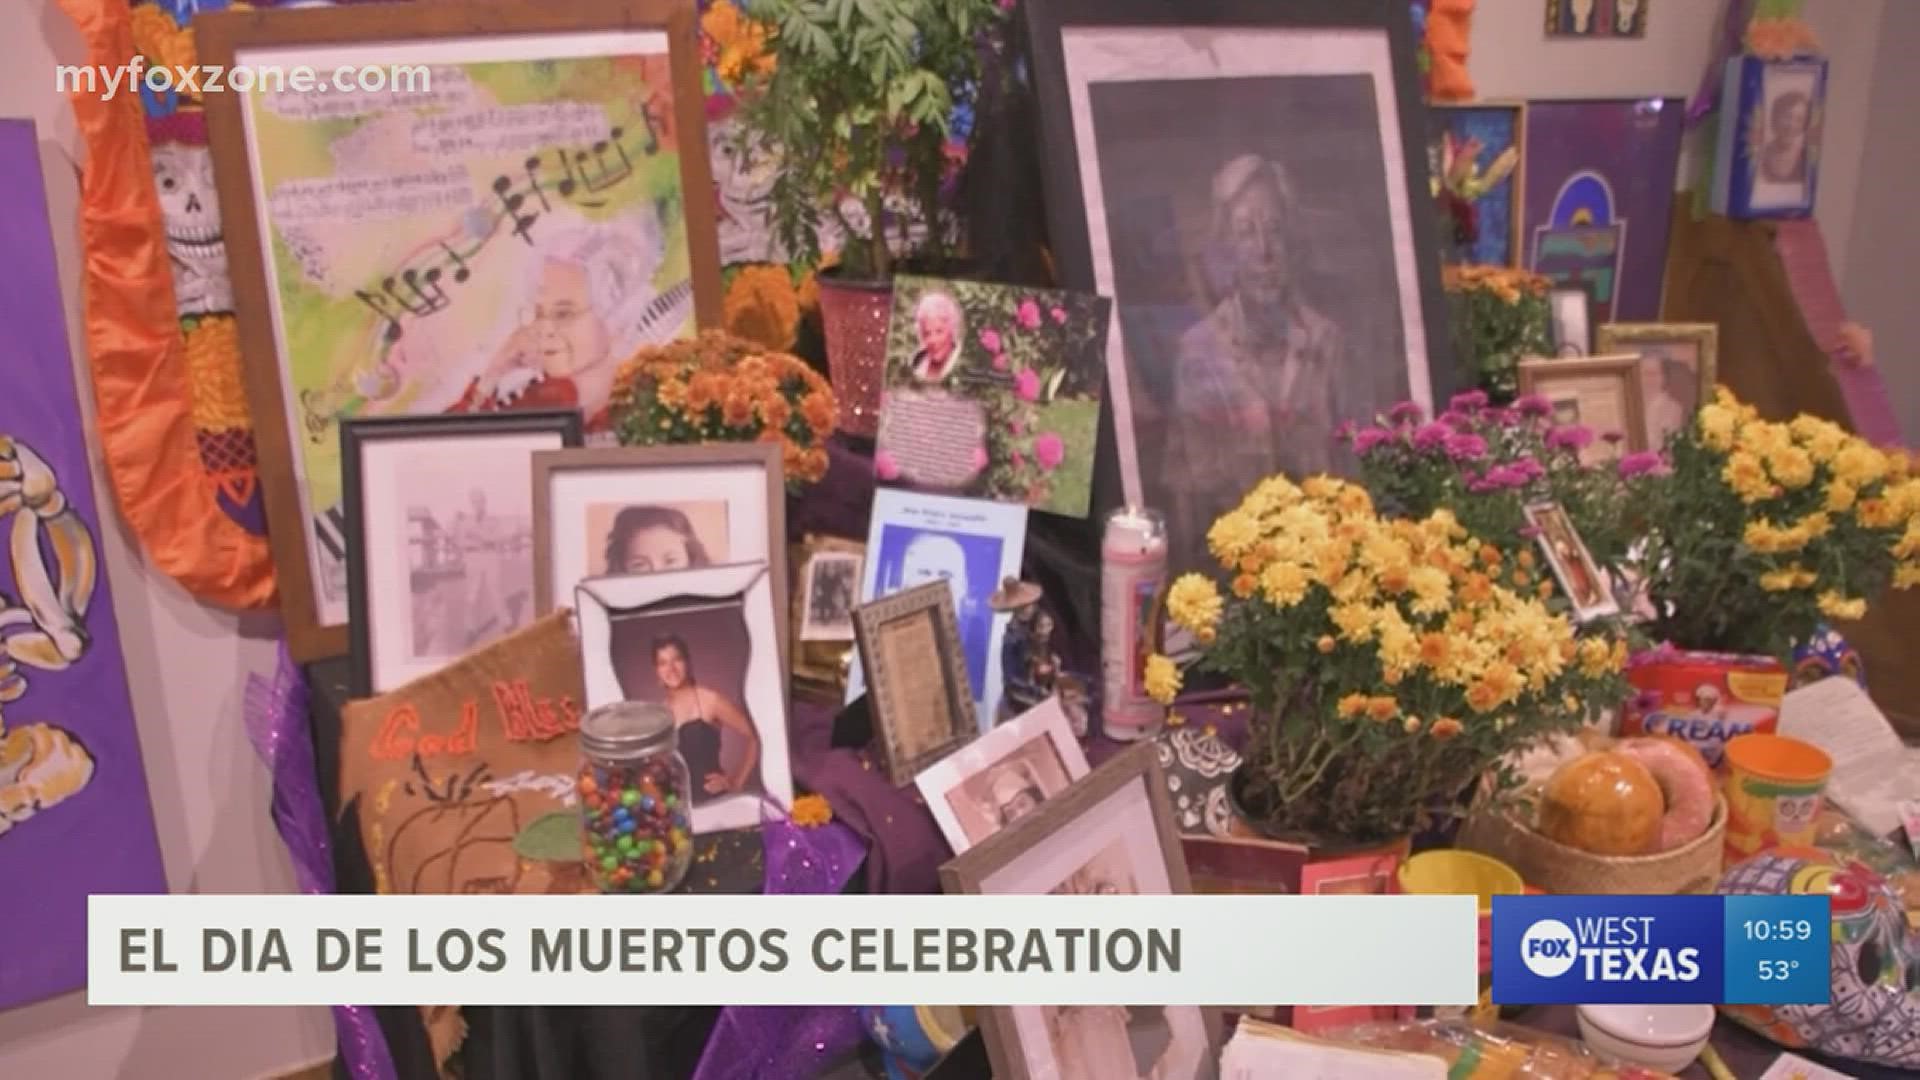 El Dia de los Muertos is a Mexican tradition celebrated to honor the life and death of loved ones that have died.